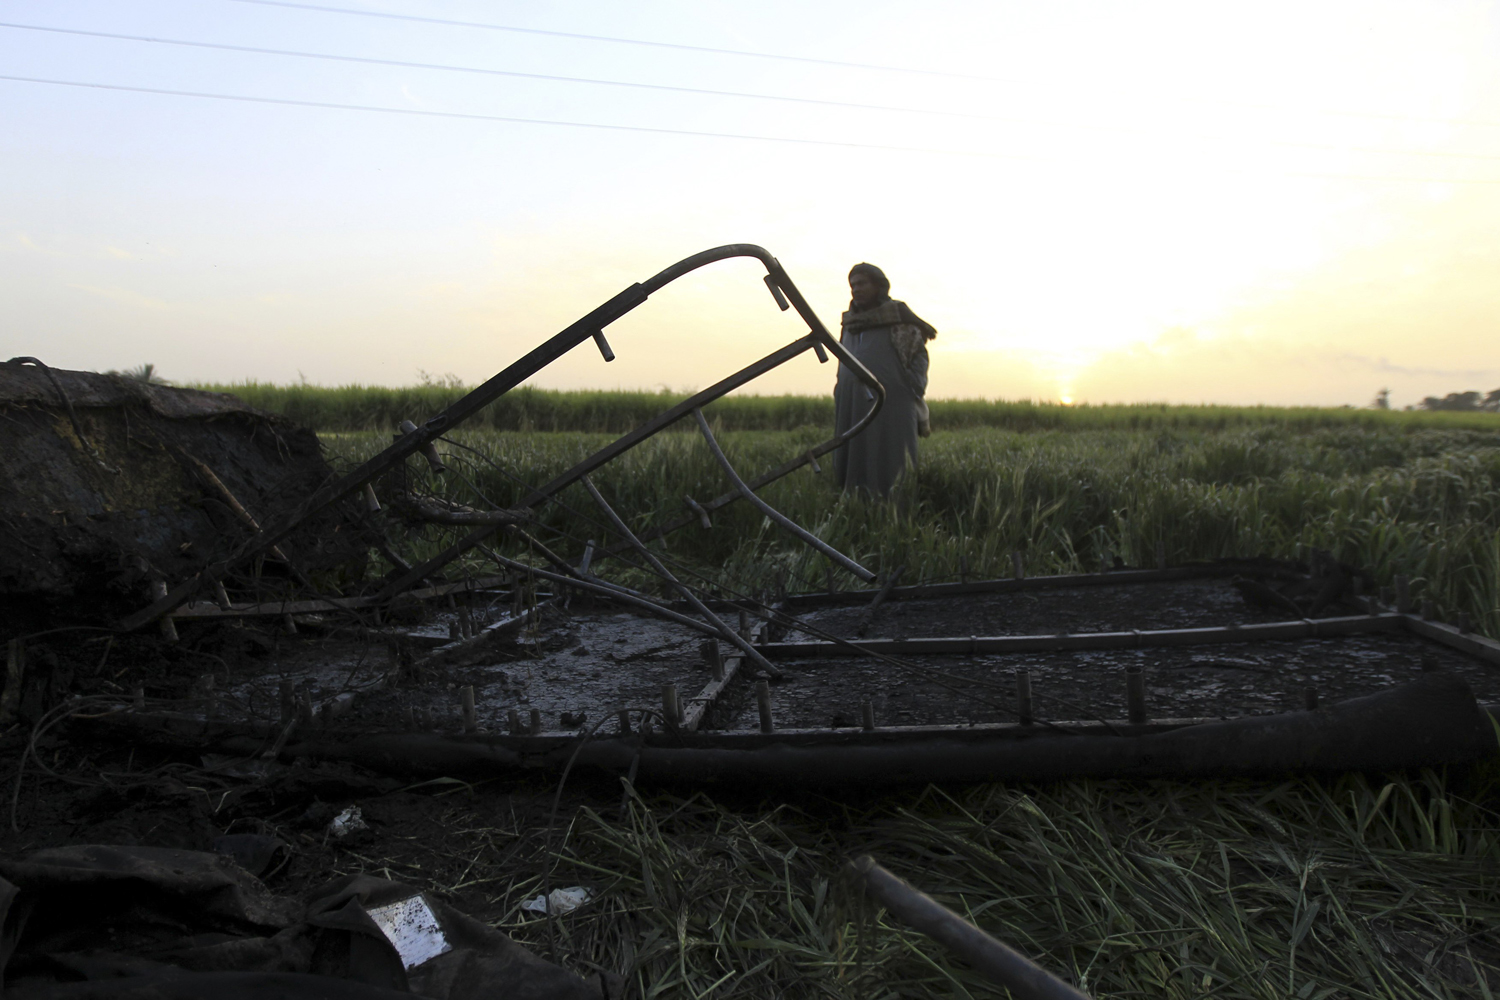 A night watchman stands guard near the wreckage of a hot air balloon that crashed in Luxor